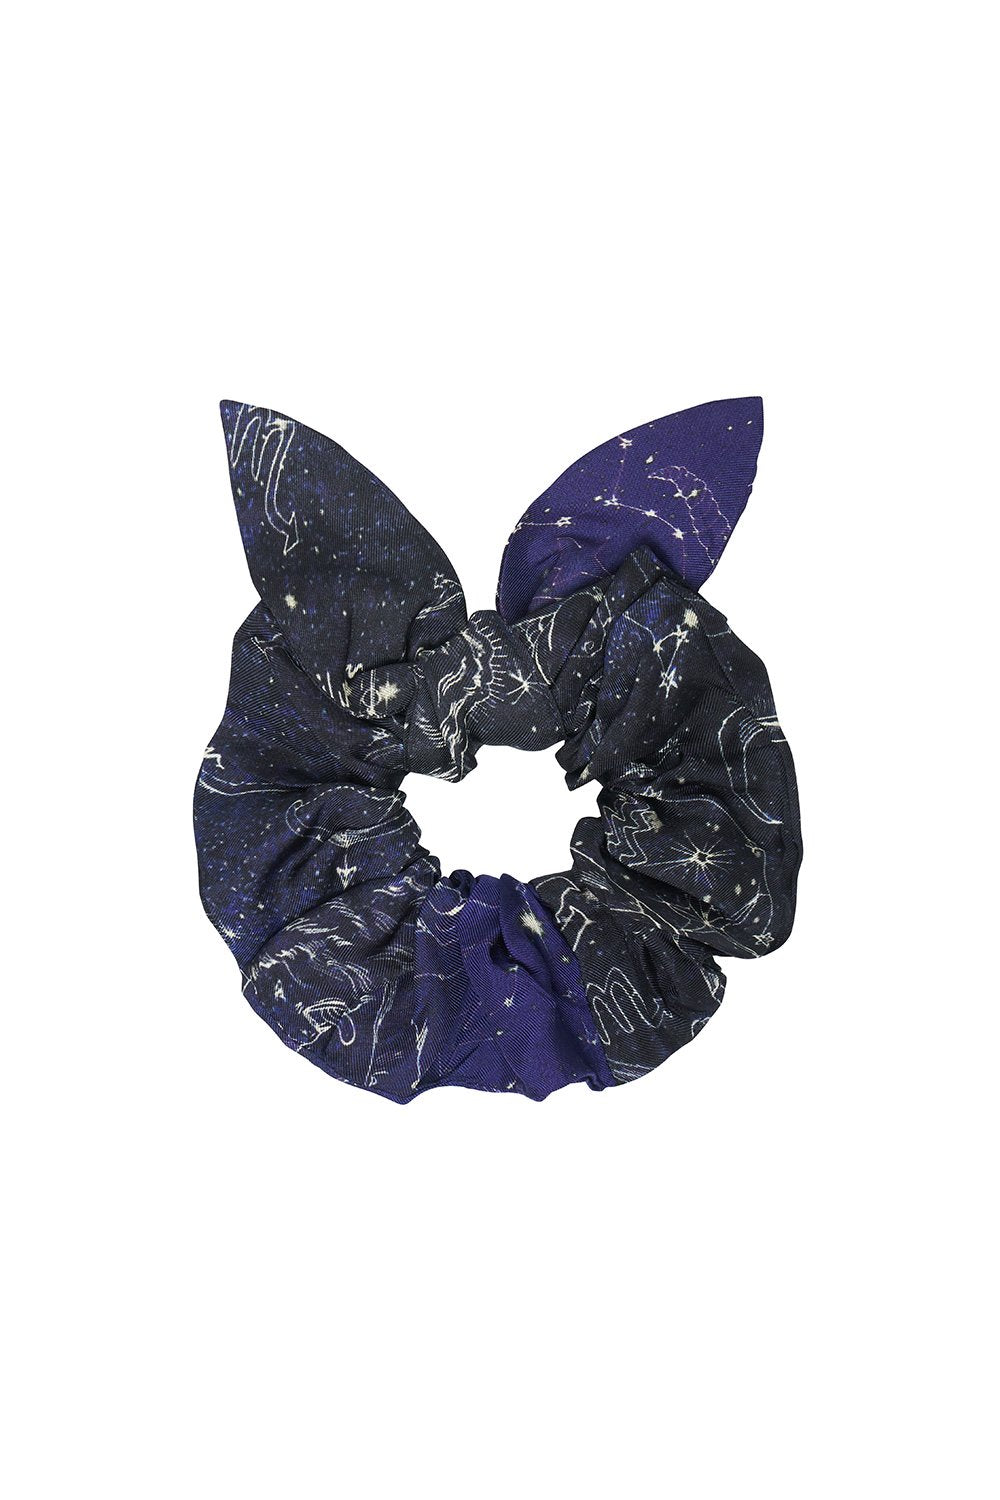 SCRUNCHIE COSMIC FORCES